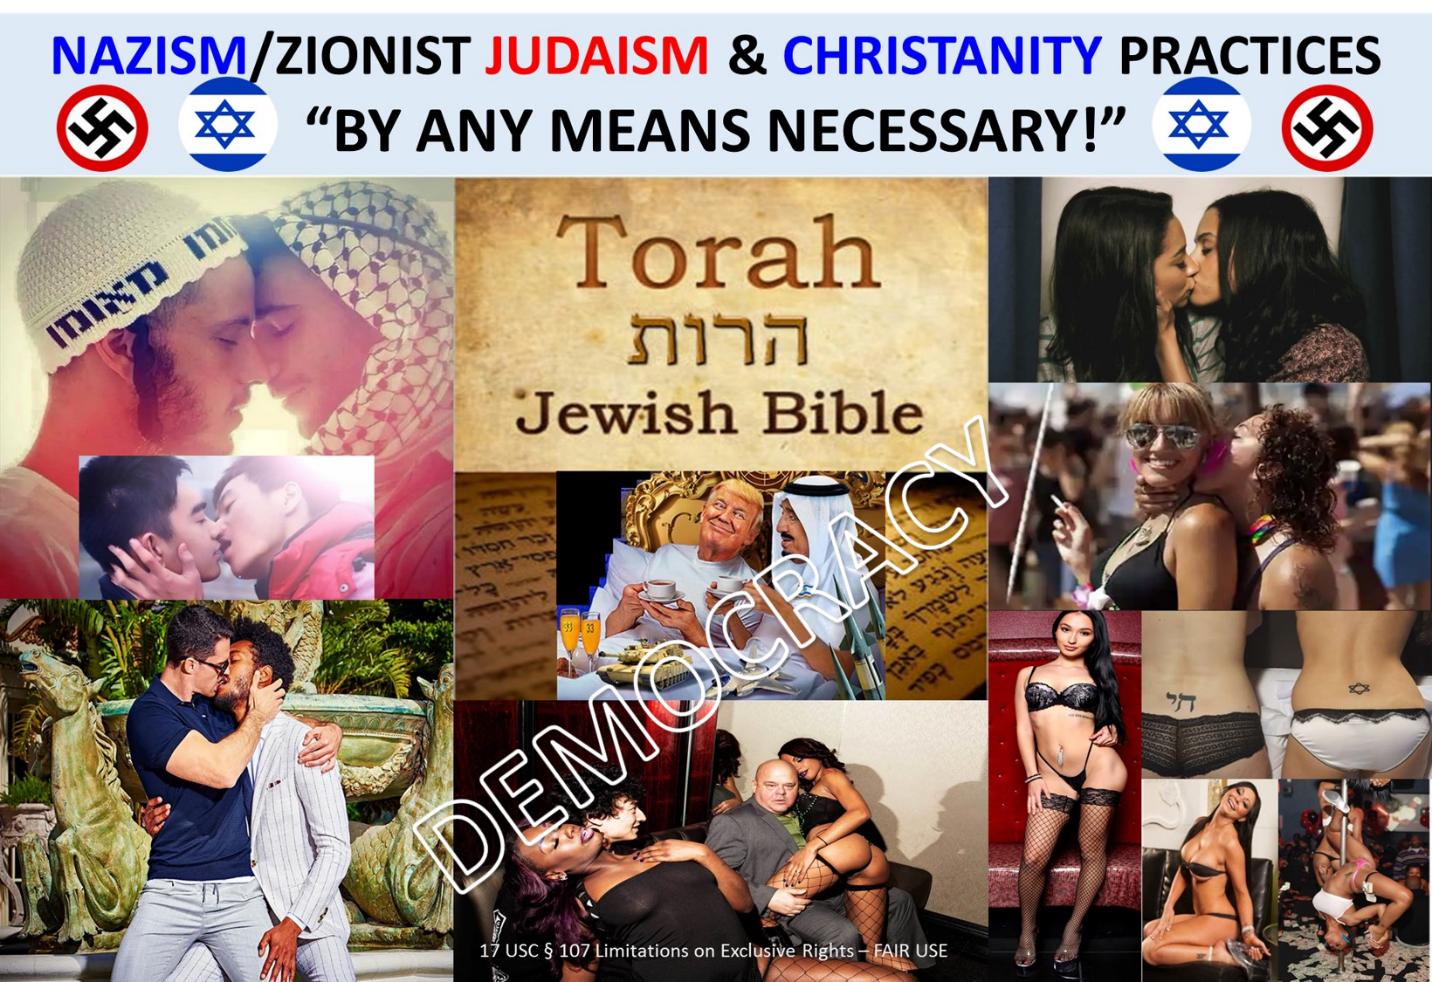 CHRISTIANITY CATHOLICISM ZIONISM By Any Means Necessary